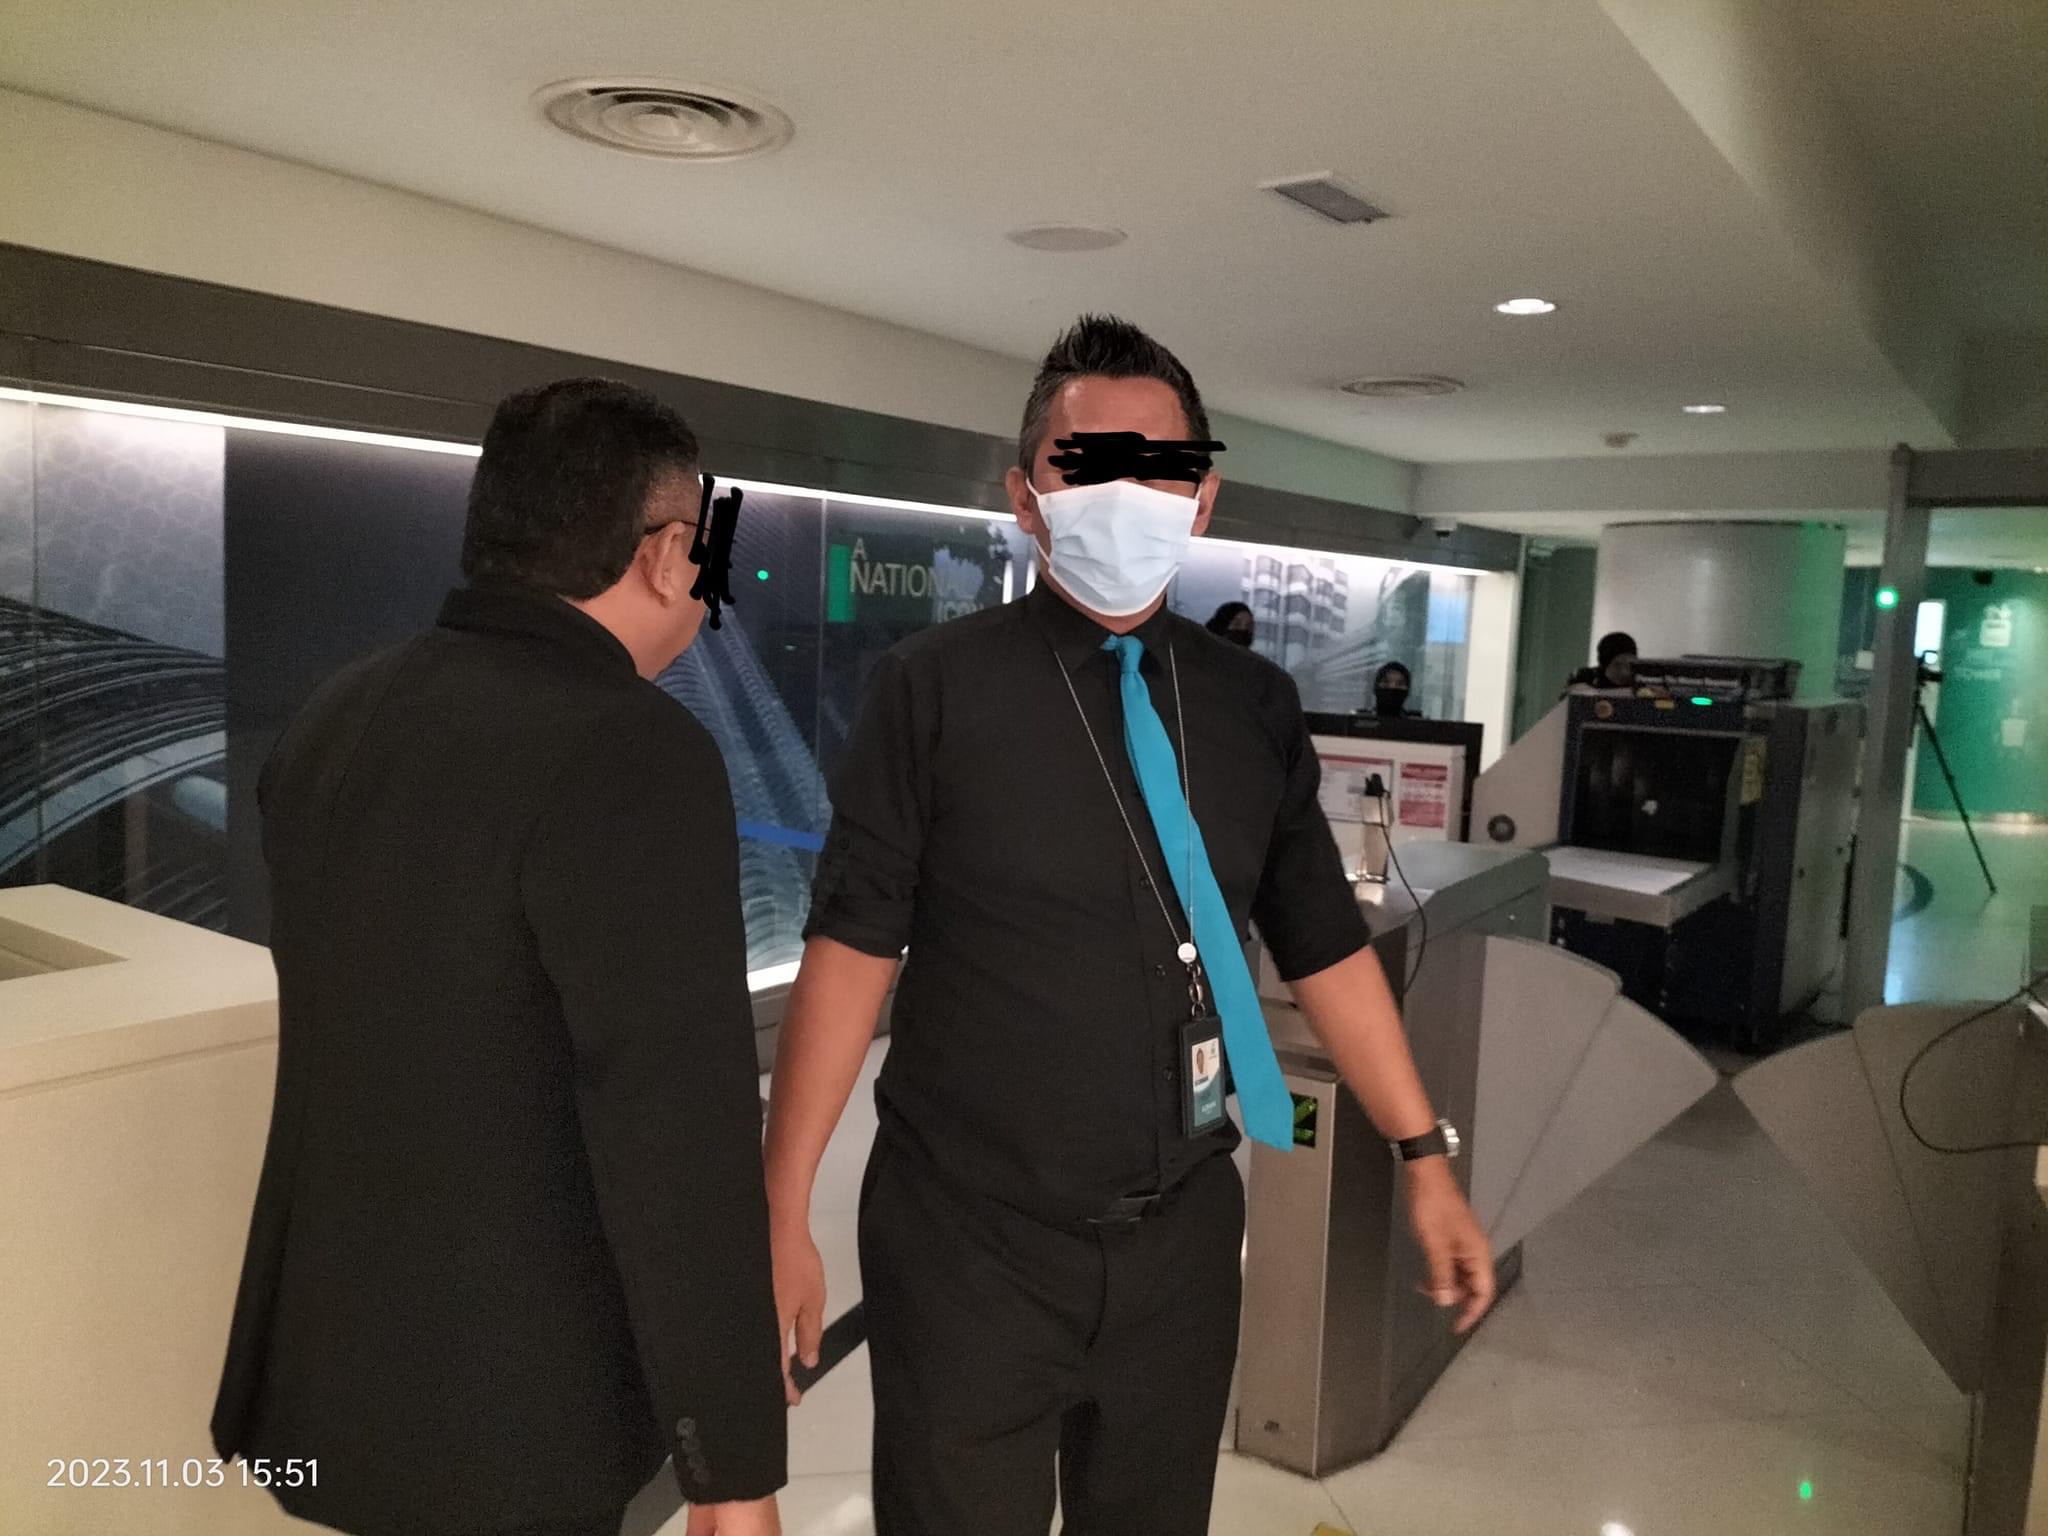 2 suspects in the queue cutting issue at petronas twin towers